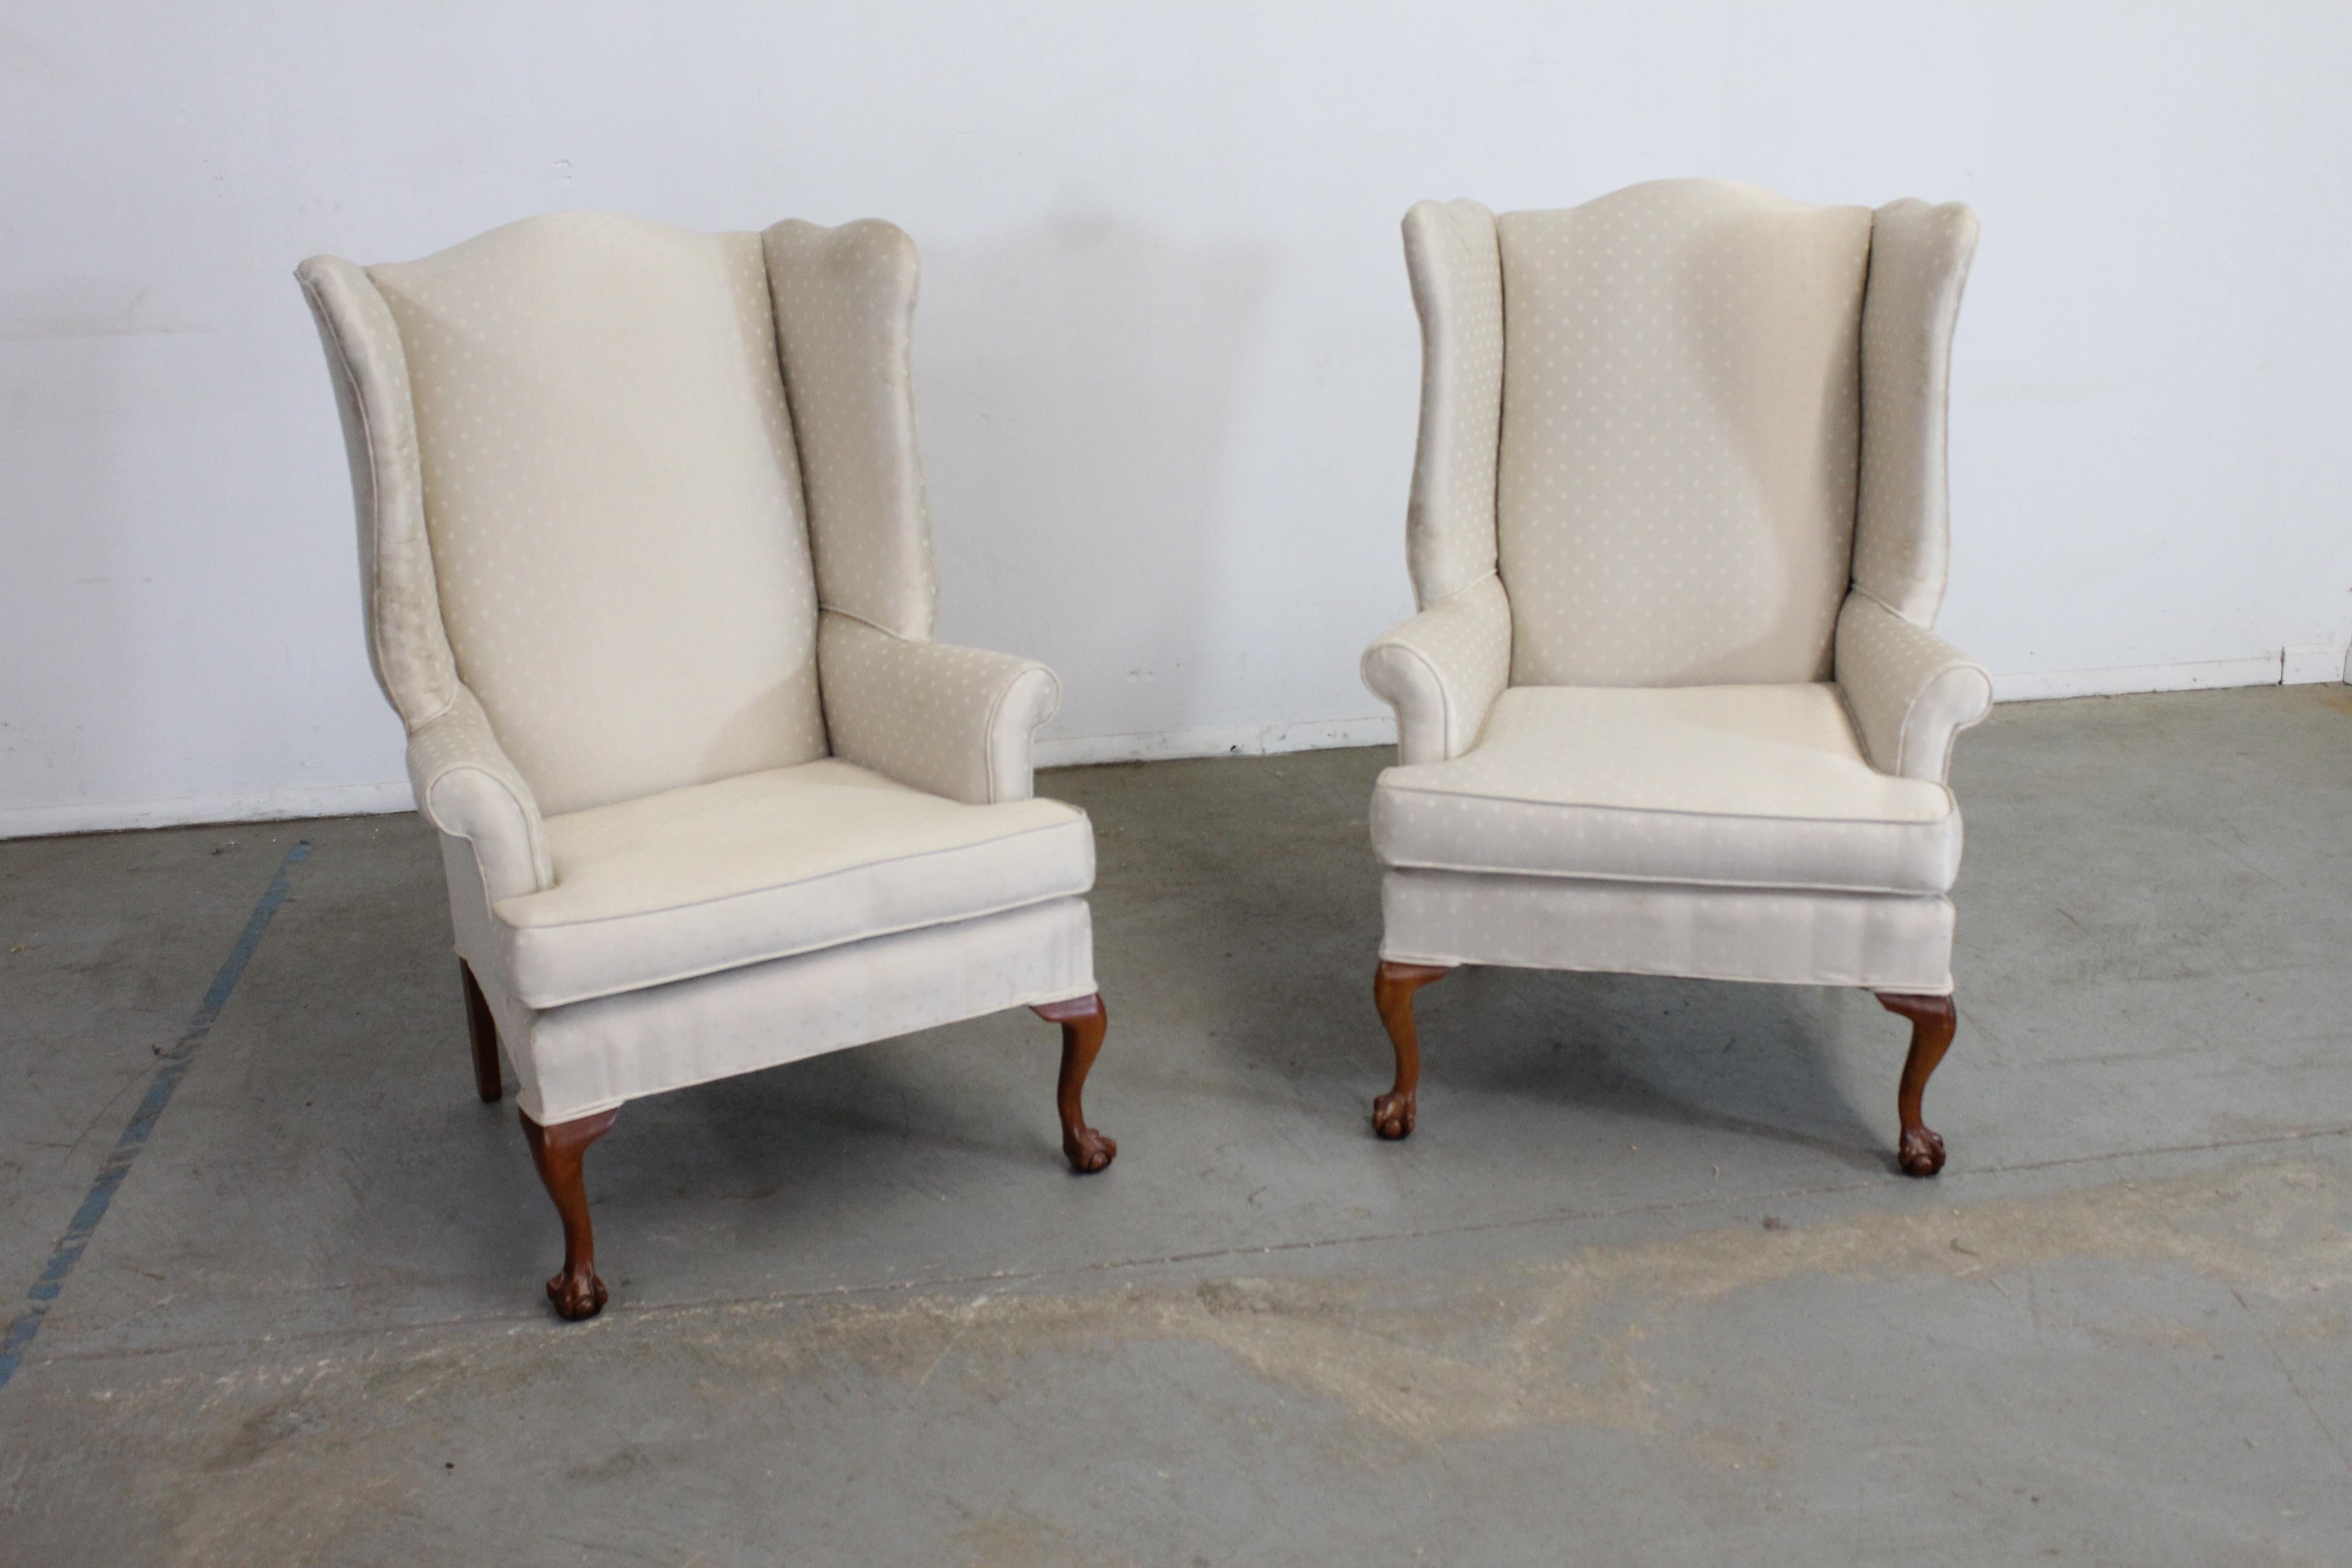 Pair of ball and claw fireside wingback chairs by Thomasville

Offered is a pair of ball and claw fireside wingback chairs by Thomasville. The chairs have a great look with nice lines, design, and look. The chairs are in good condition, but need